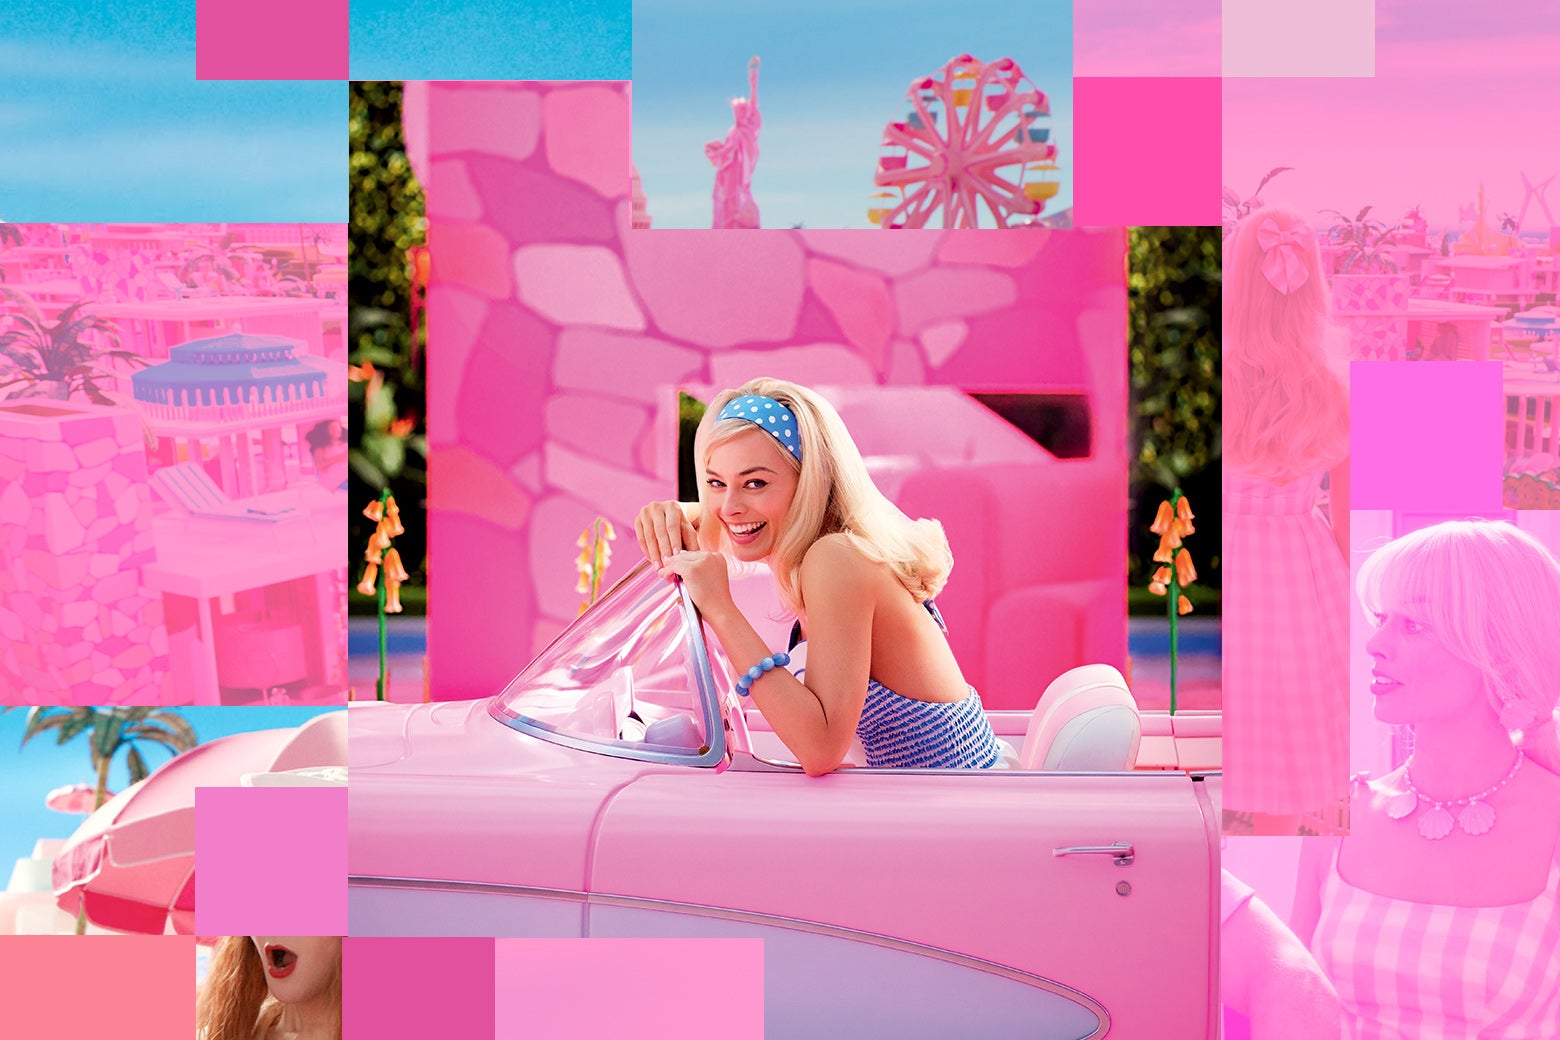 20 Best Quotes From the New Barbie Movie 2023